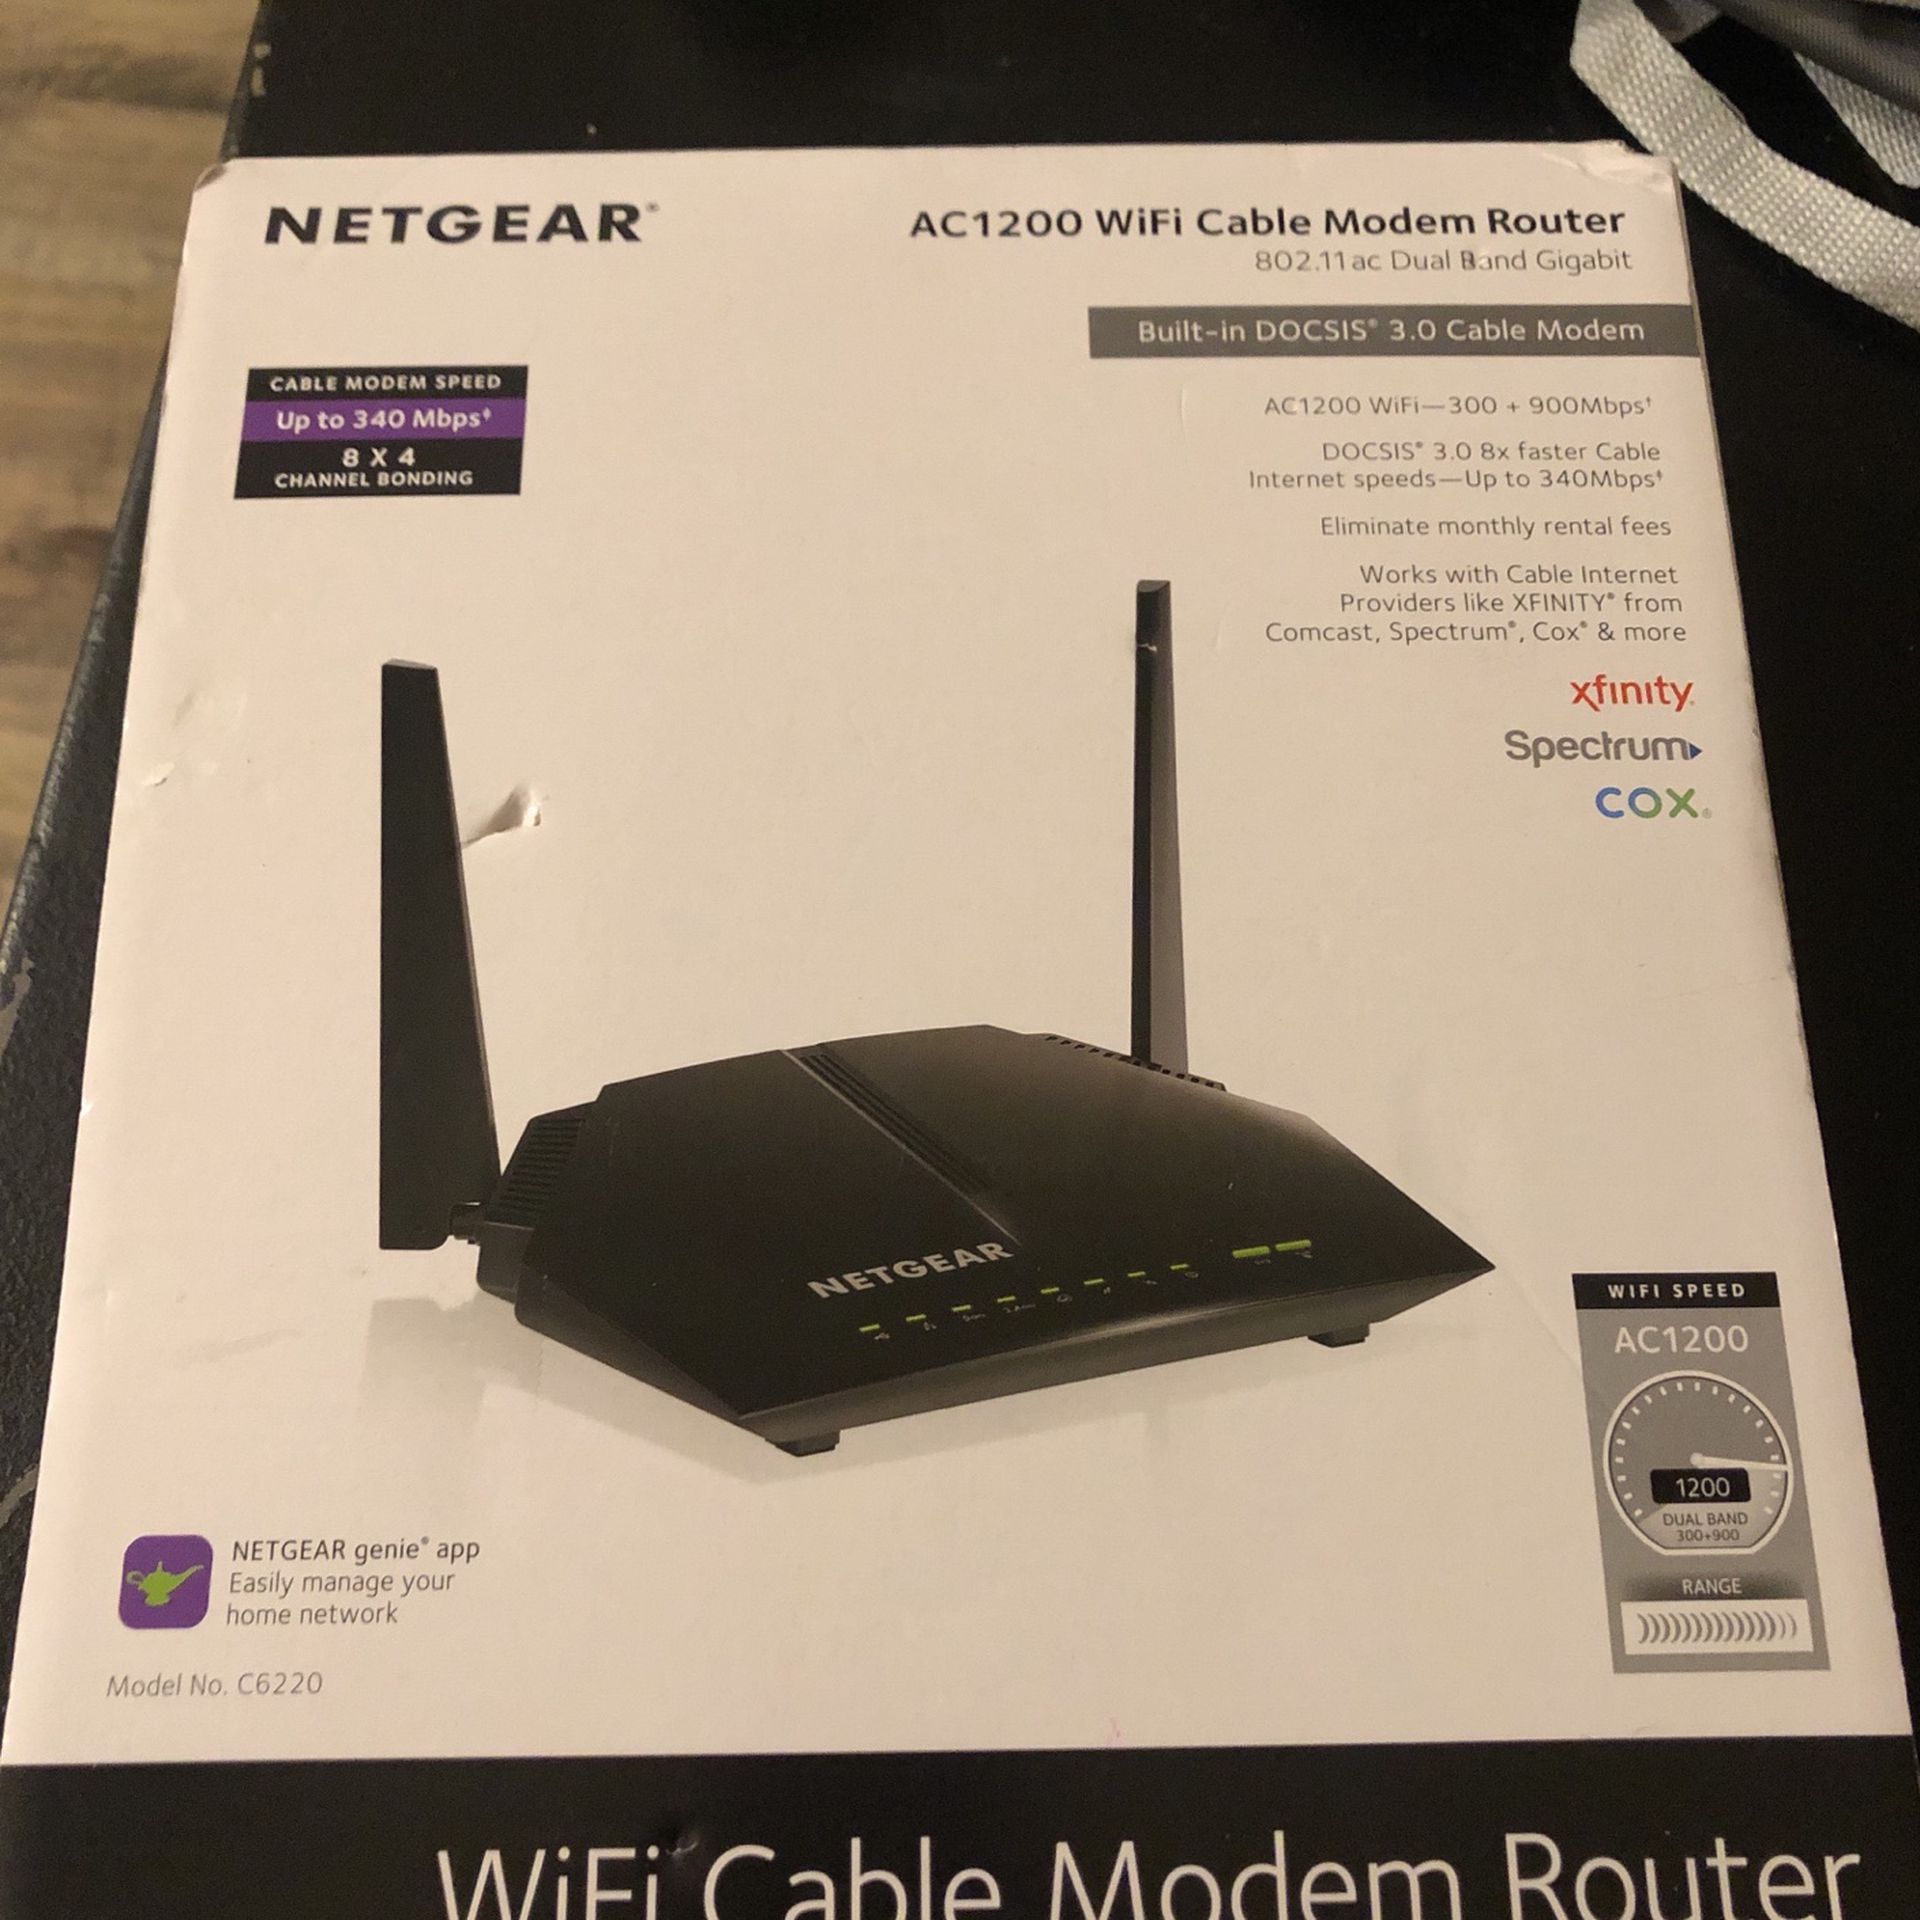 Cable Modem WiFi Router Save $$$$ On Your Comcast!